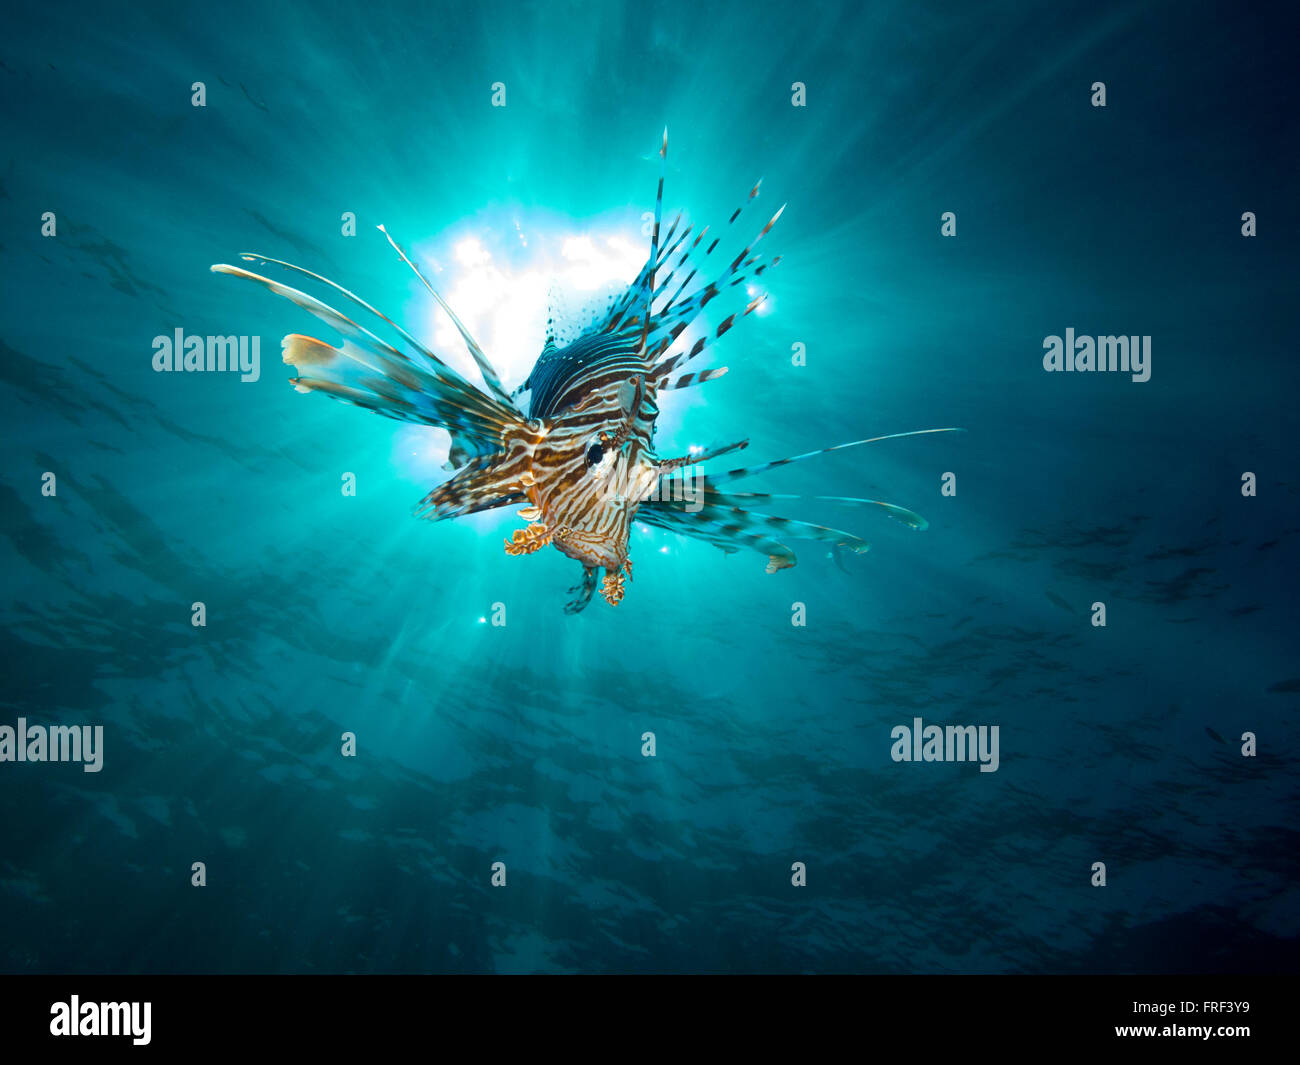 A lionfish diving in the ocean Stock Photo